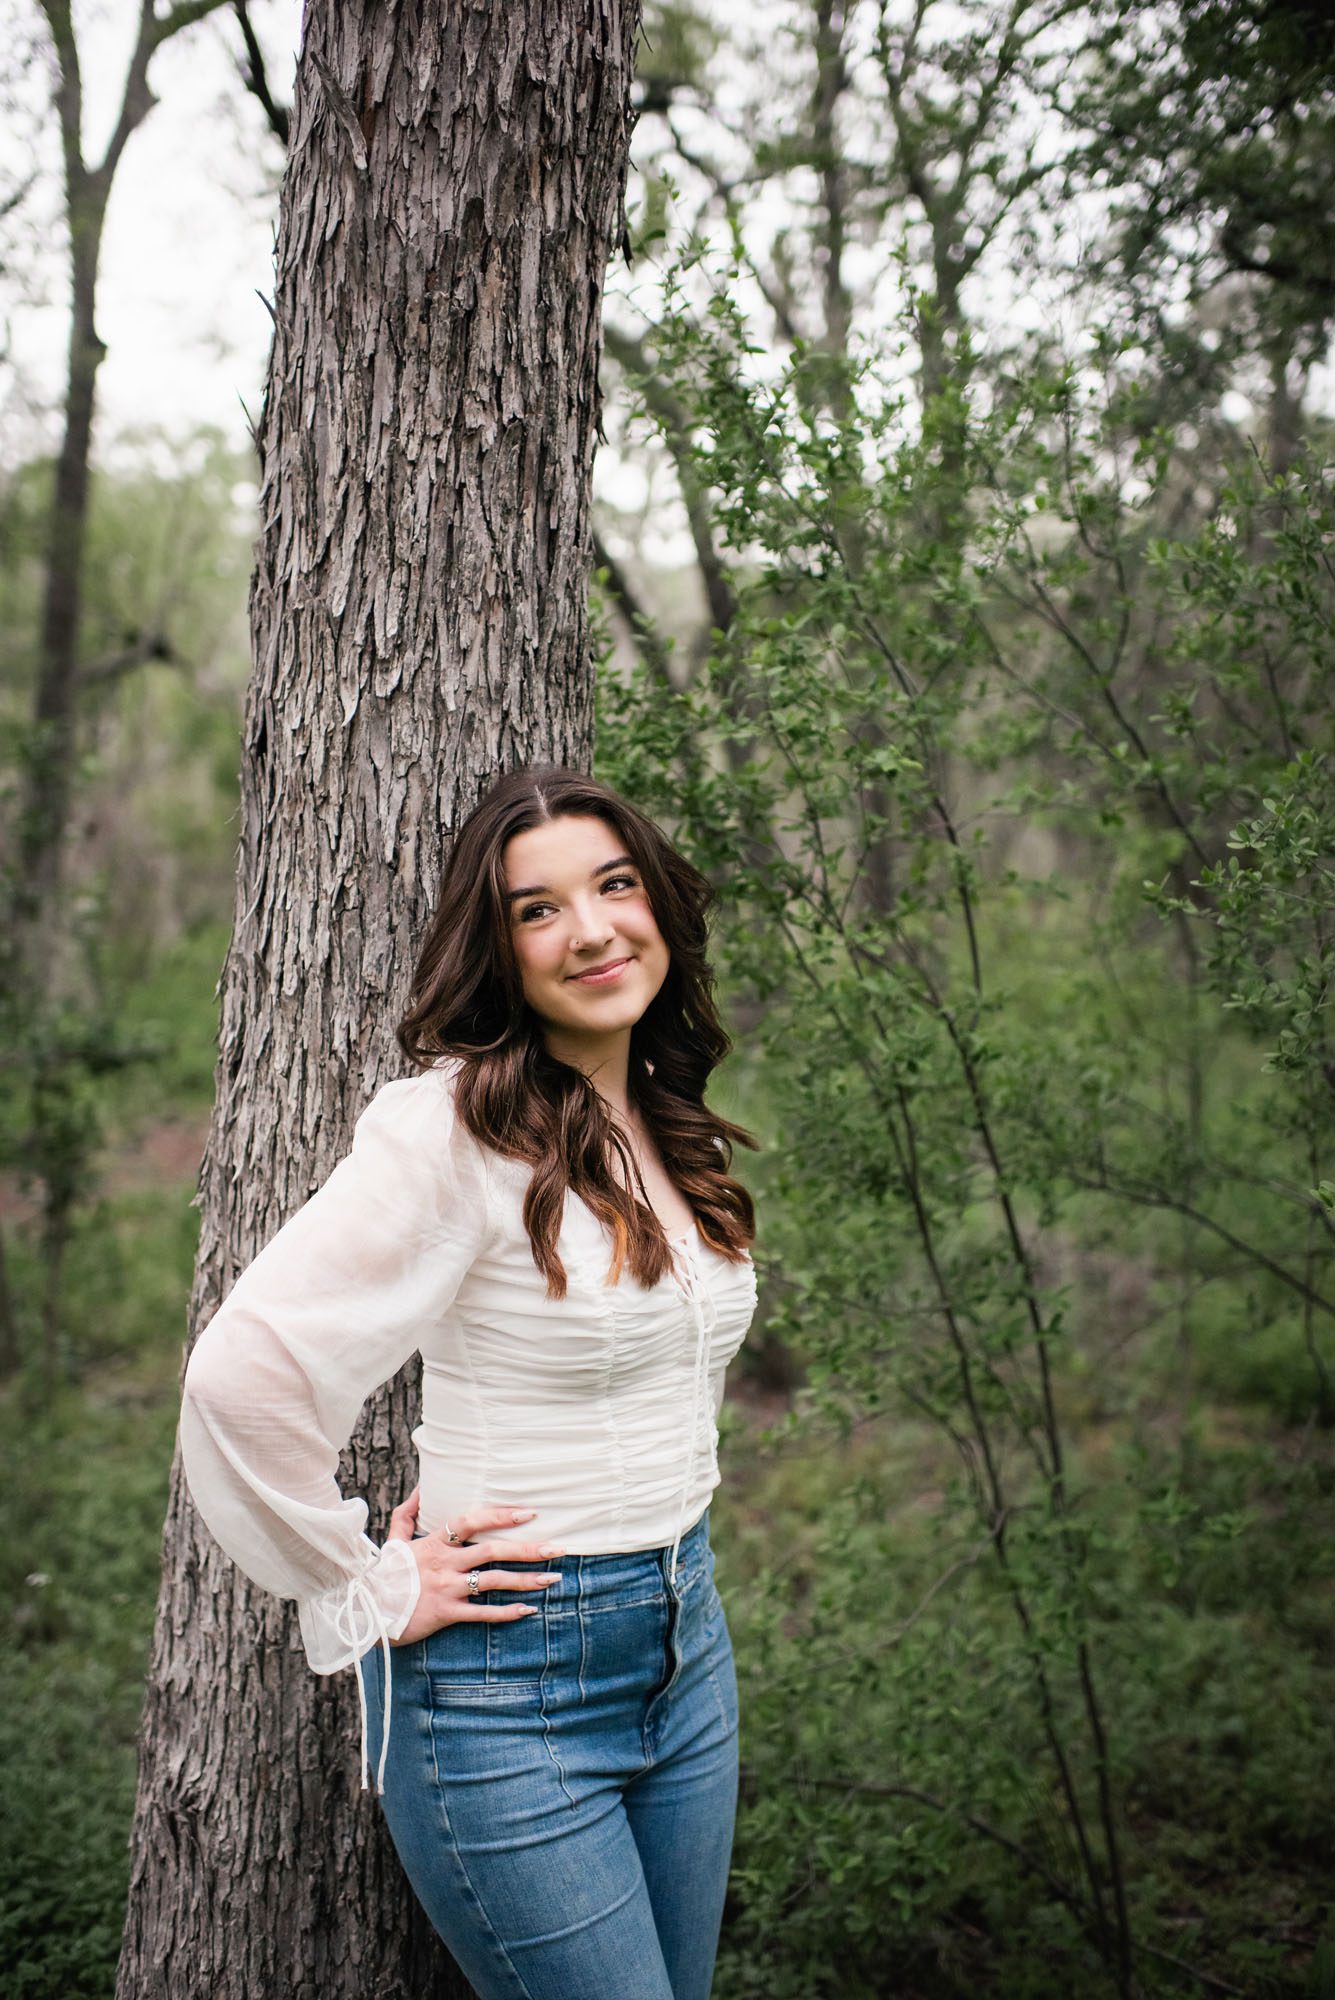 Girl in white shirt and jeans standing by tree, San Antonio senior photographer